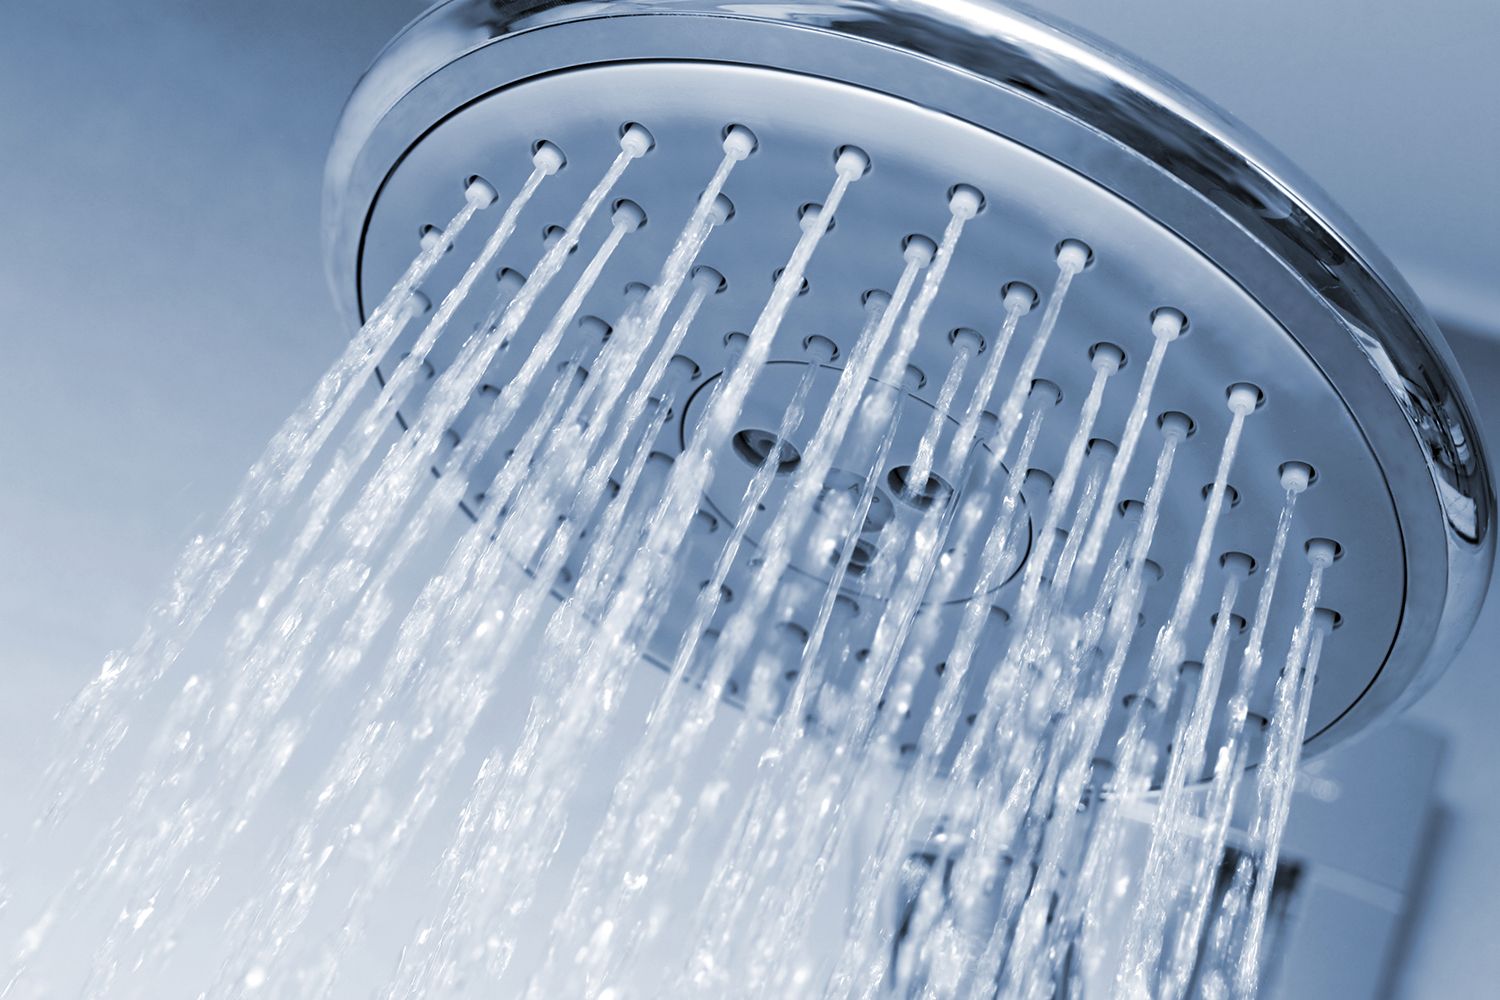 What to Look for When Buying a Shower Head